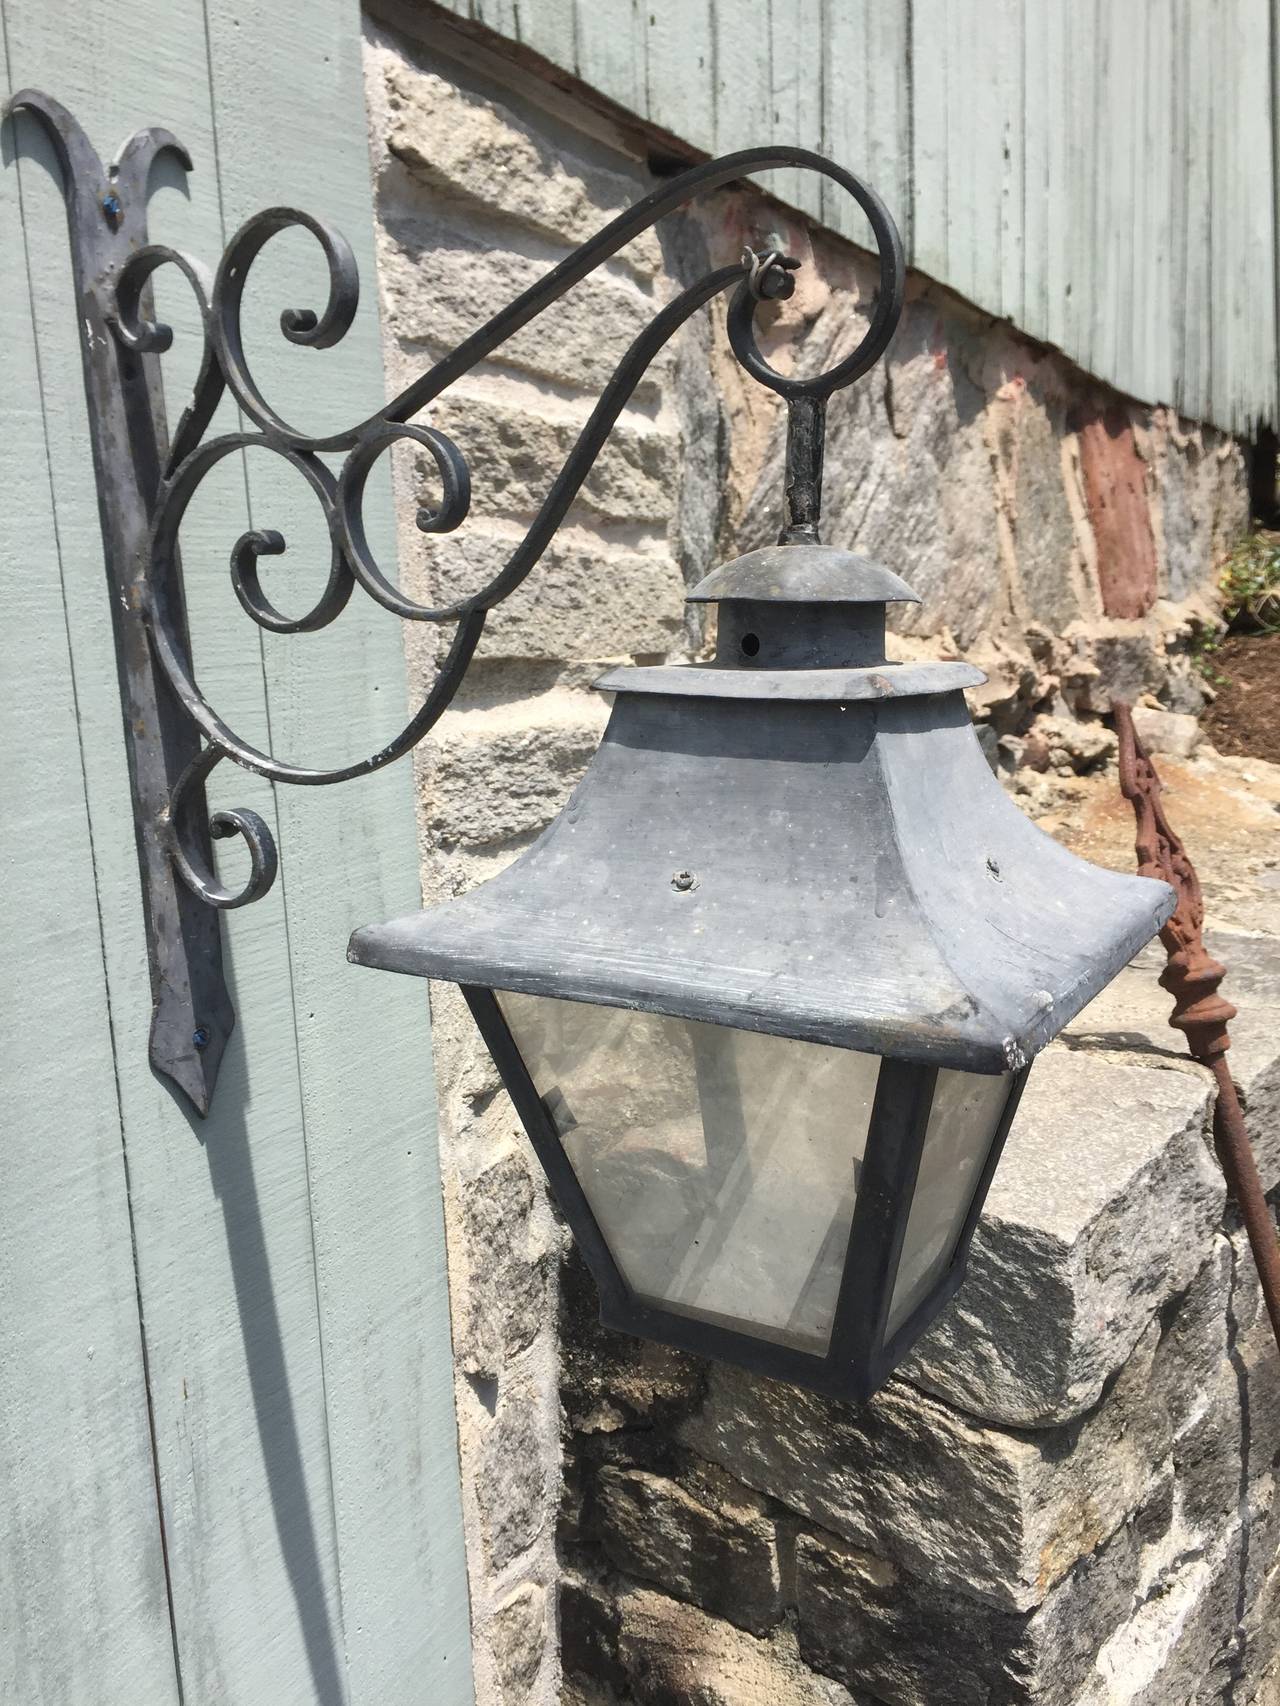 We bought this wonderful lantern in the Southwest of France, not far from Bordeaux. Made of wrought iron and steel, with its original scrolled bracket and attachment plate, the old paint has weathered to a lovely grey that looks like zinc. It would